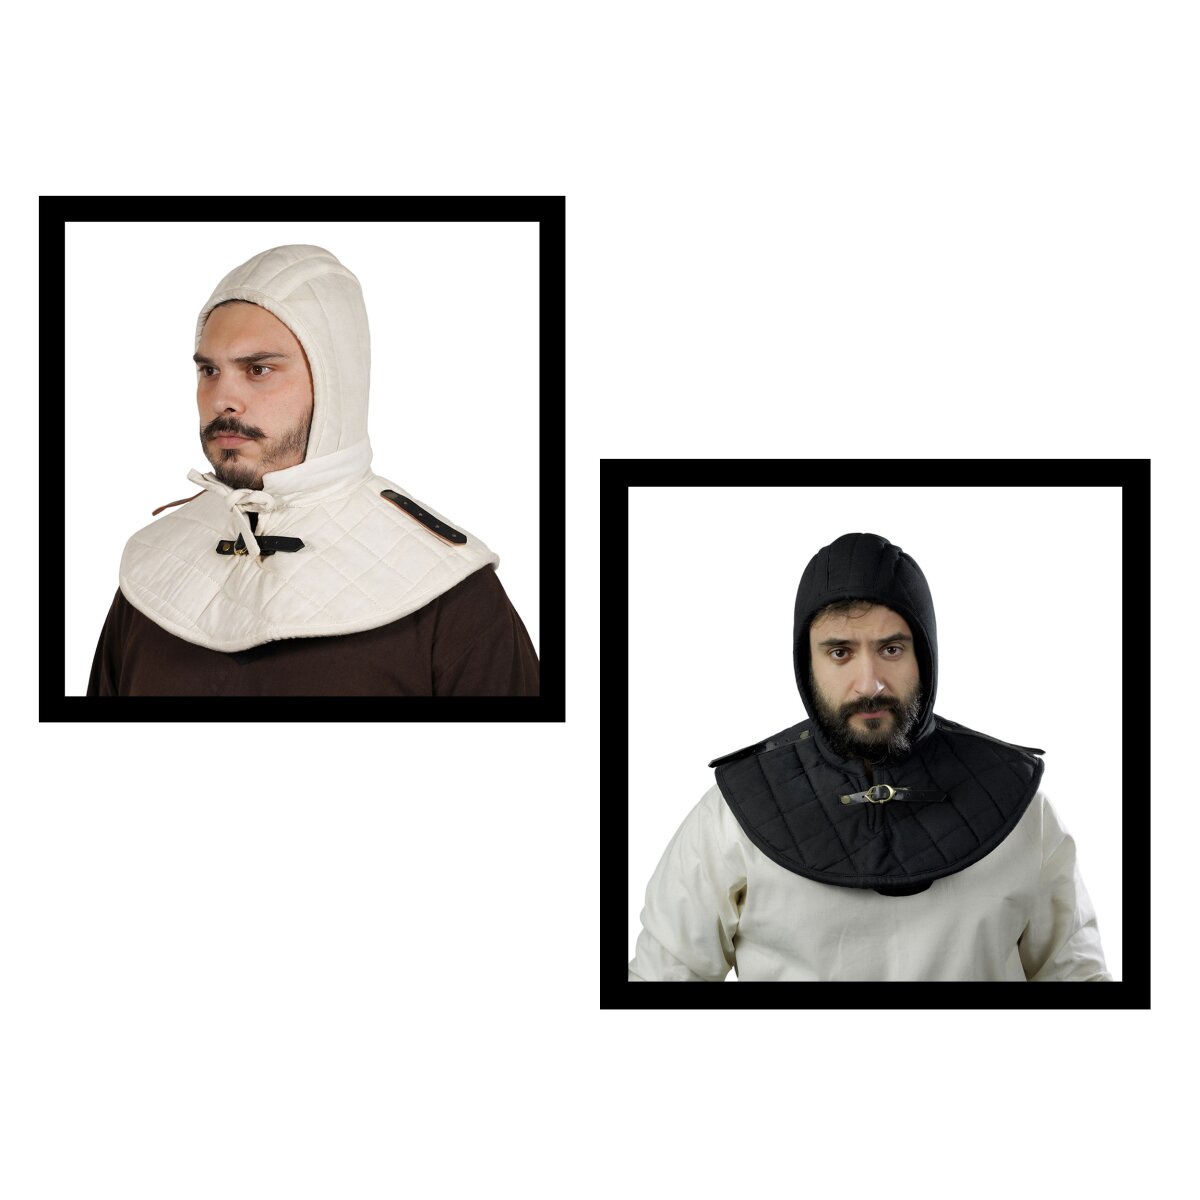 Medieval Padded Arming Cap with Hood Ready for Your...